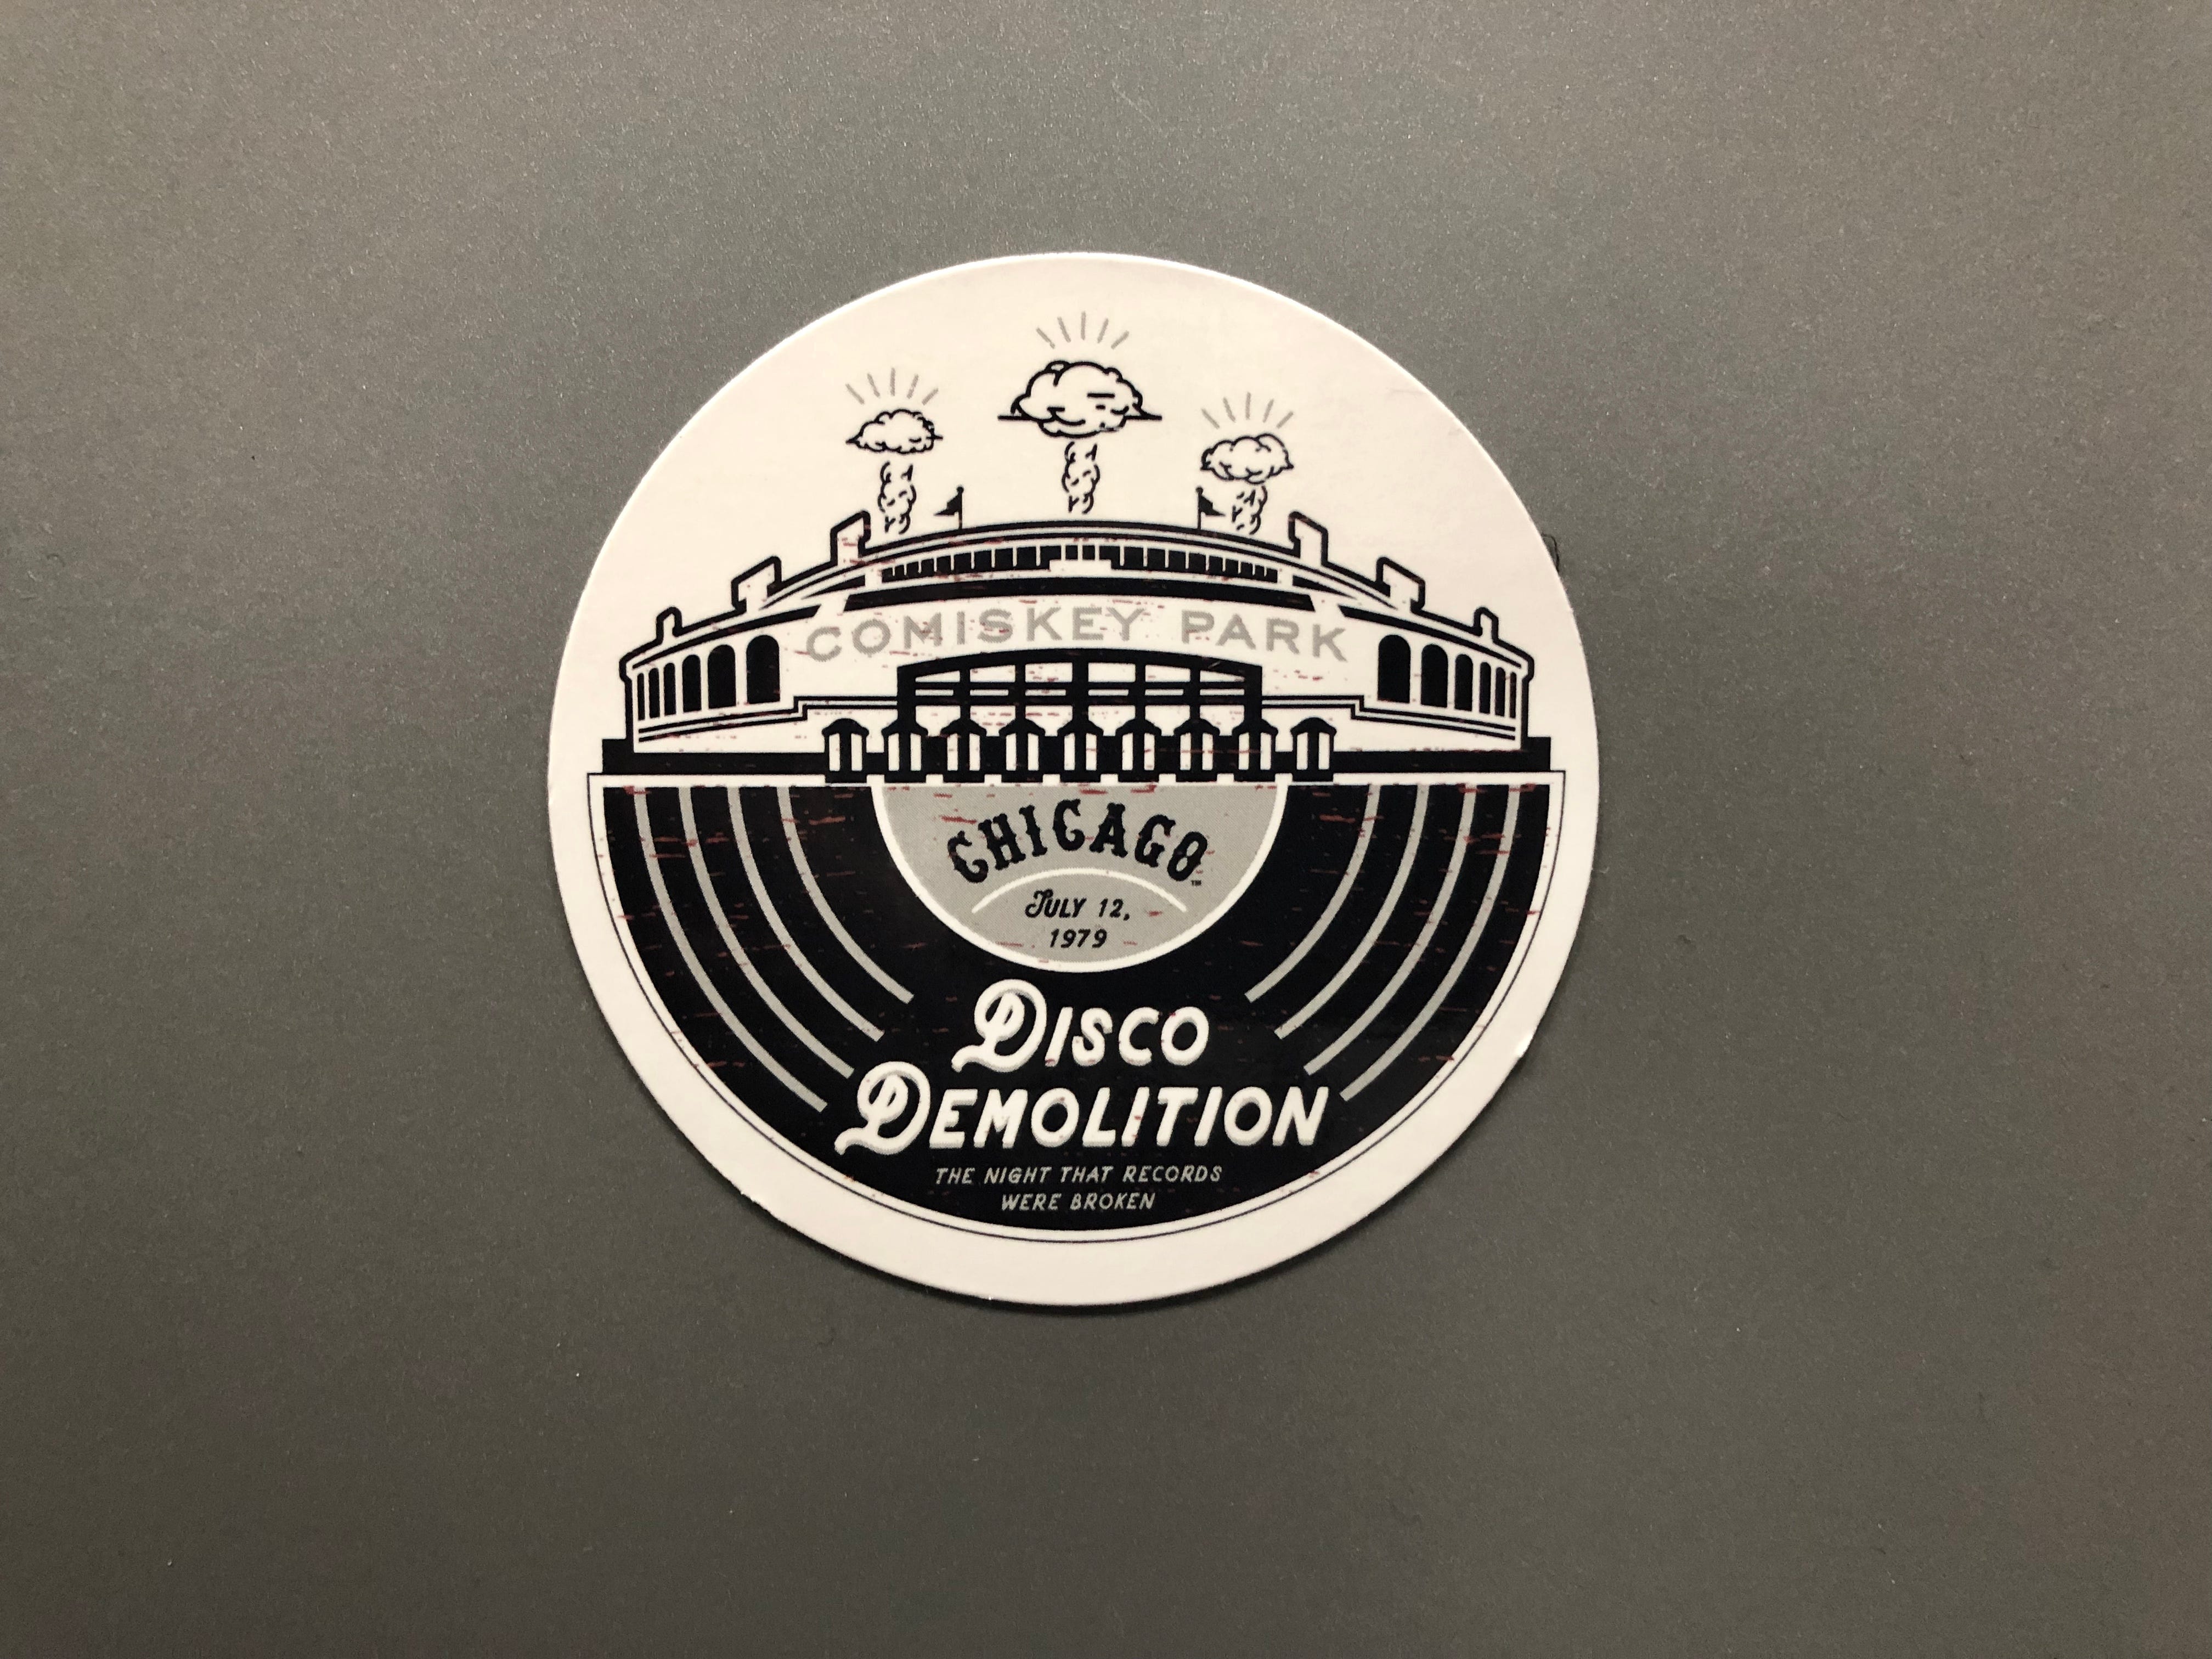 Why are the Chicago White Sox commemorating Disco Demolition Night?